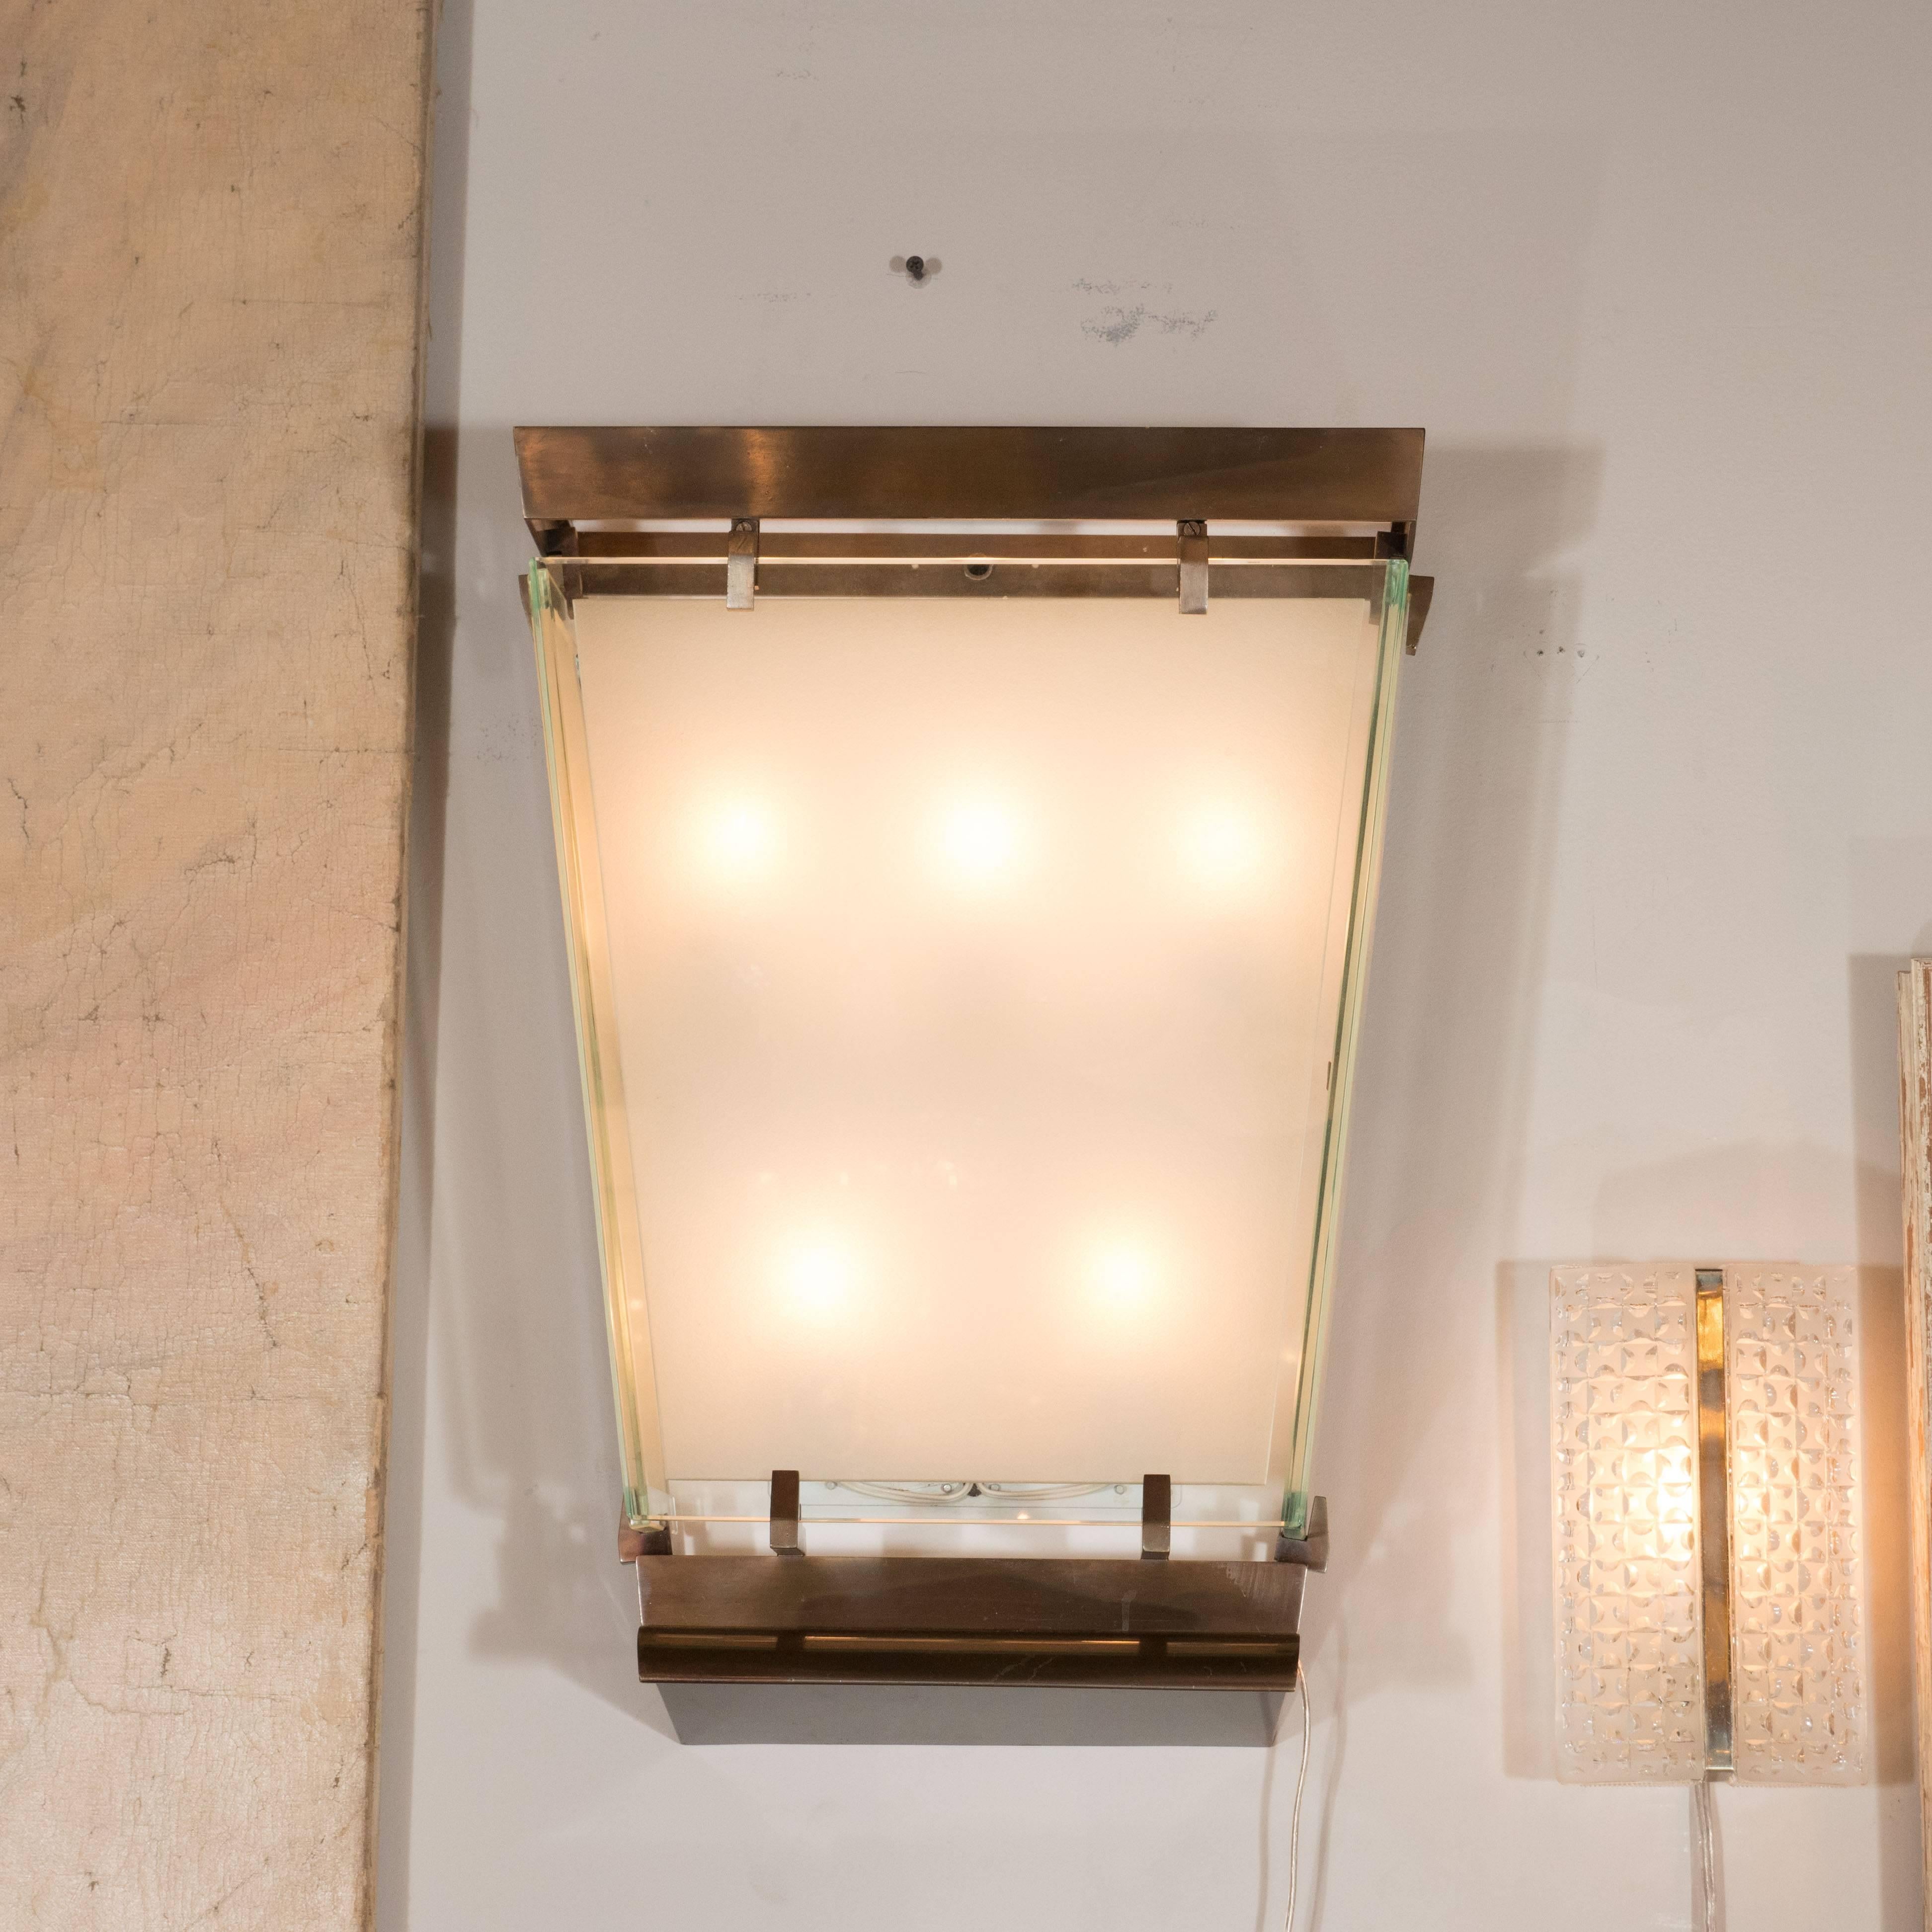 This stunning pair of Art Moderne sconces were realized in France, circa 1950. They feature rectilinear patinated brass frames with L-shaped supports in the same materials. In the center of each sits a frosted glass frame with translucent borders